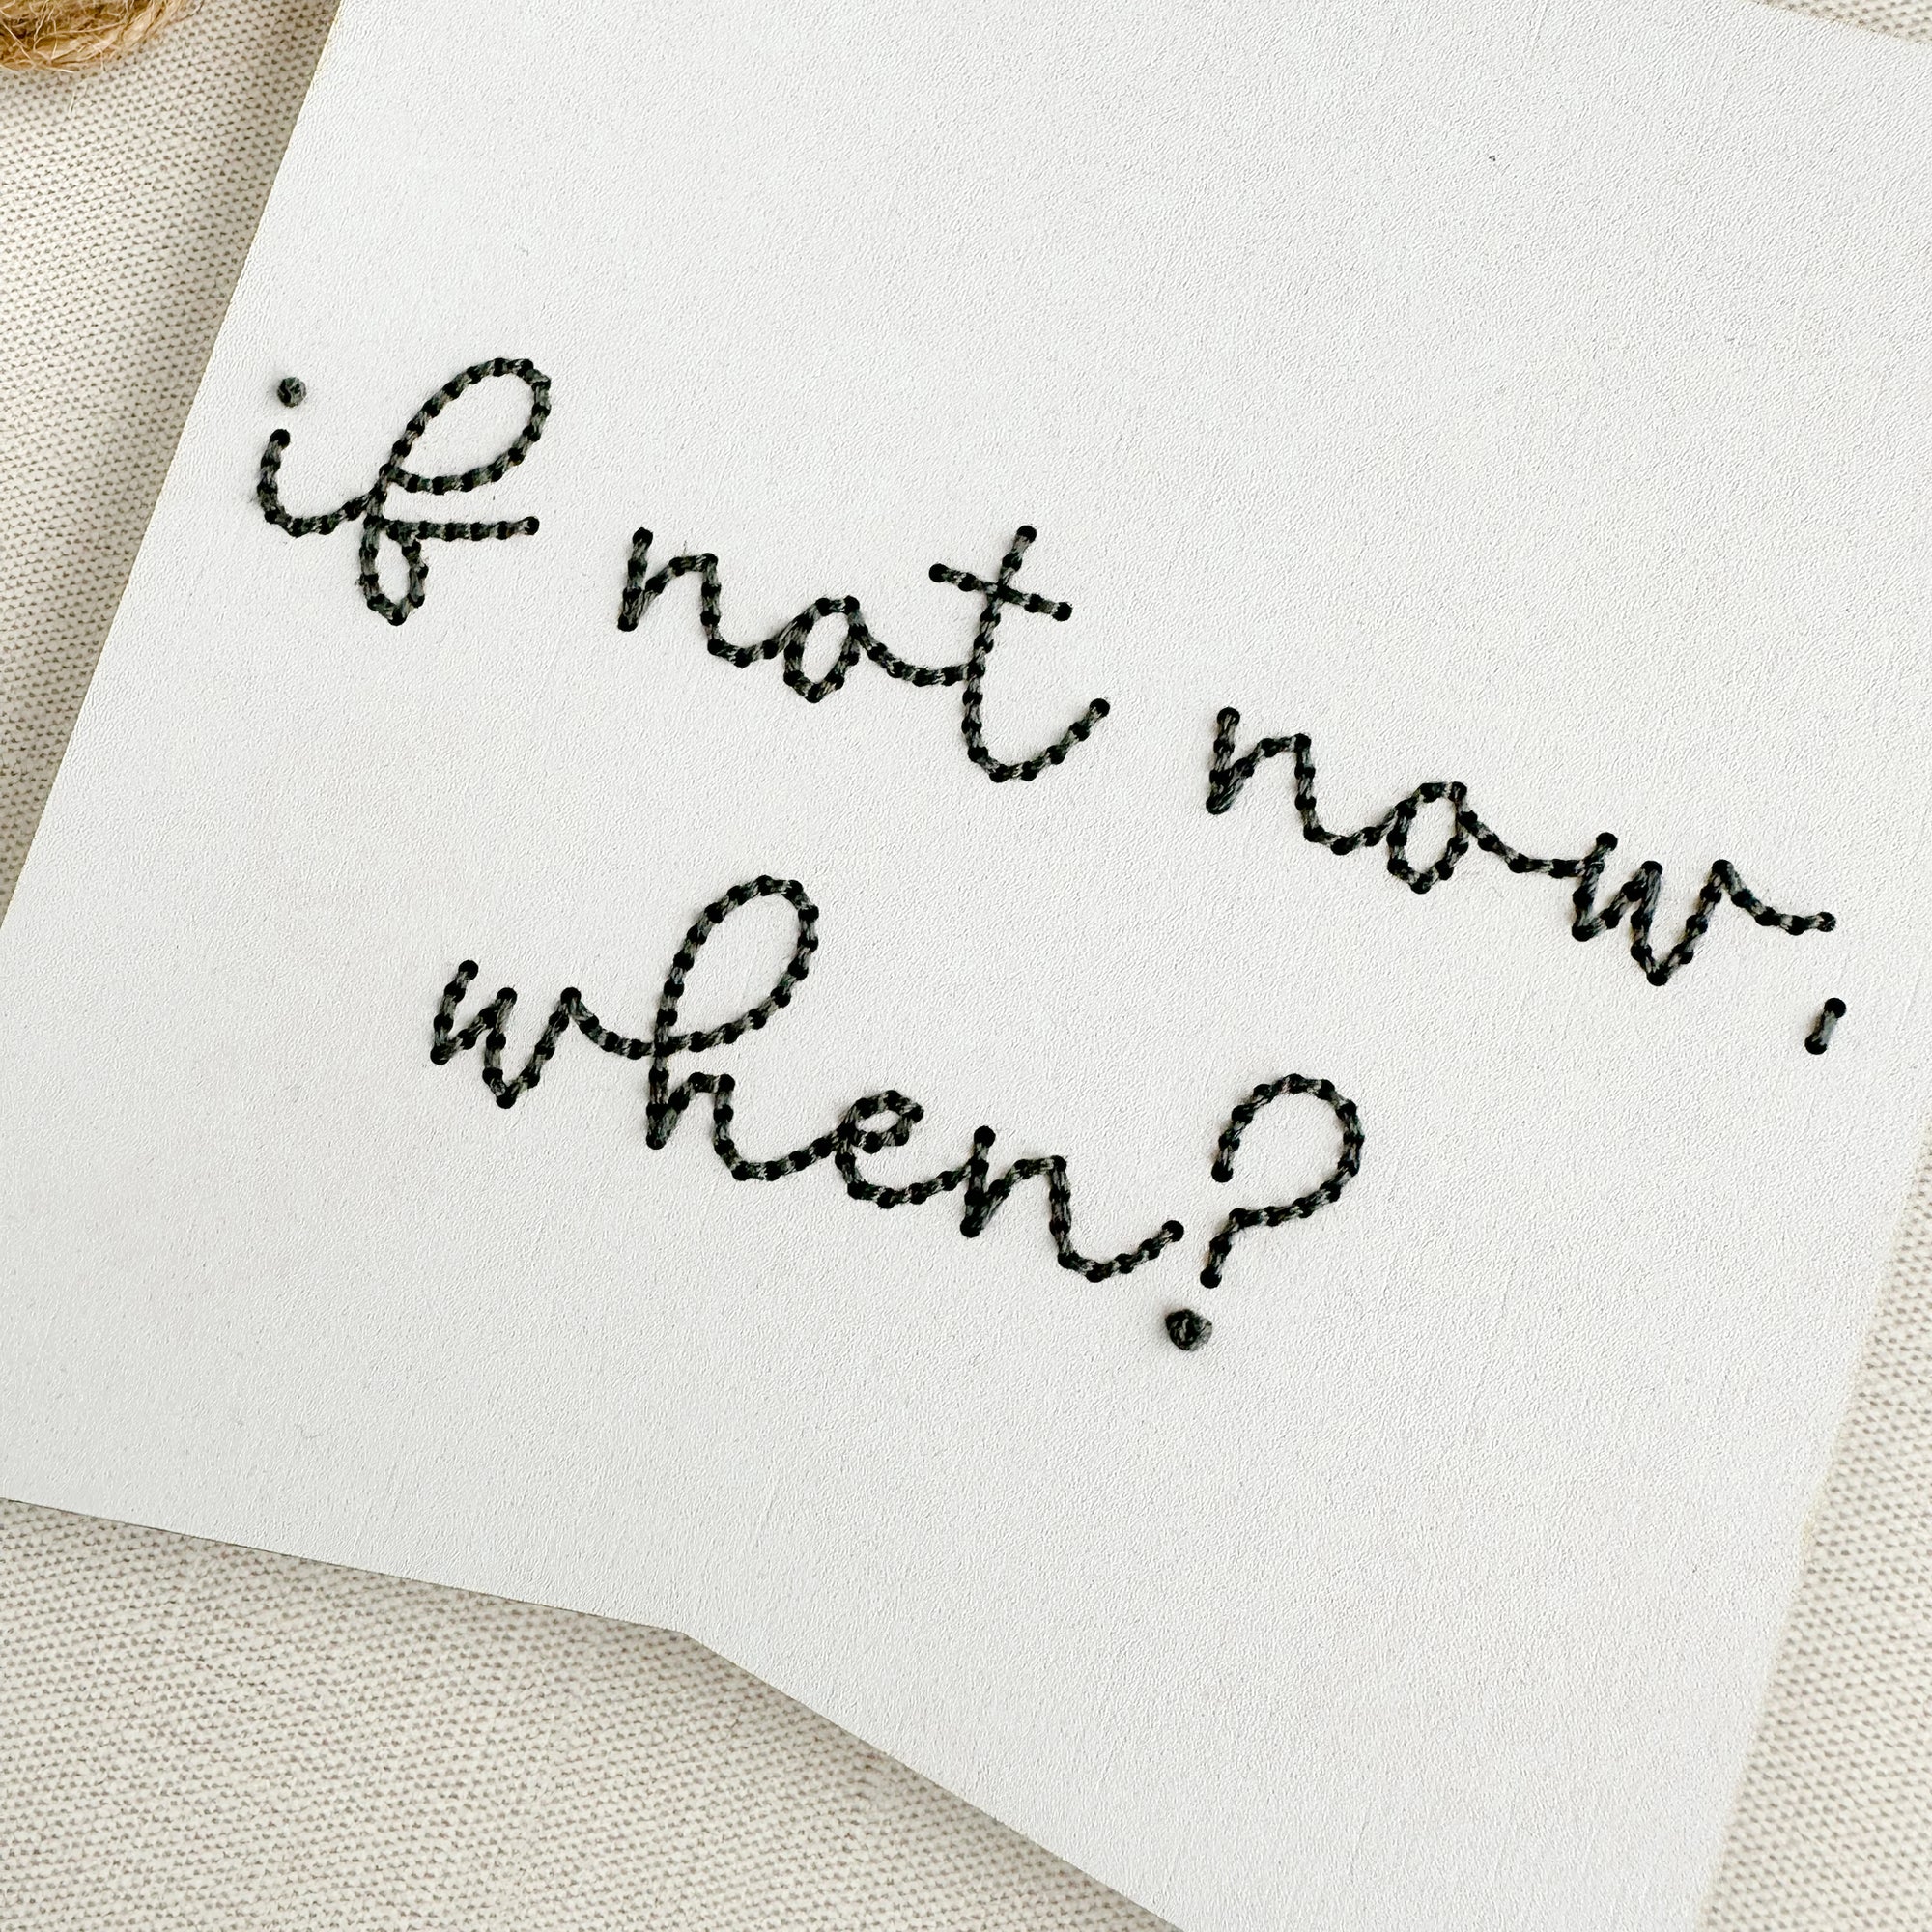 If Not Now, When? | Motivational Bold Bunting | Inspirational Embroidery Design